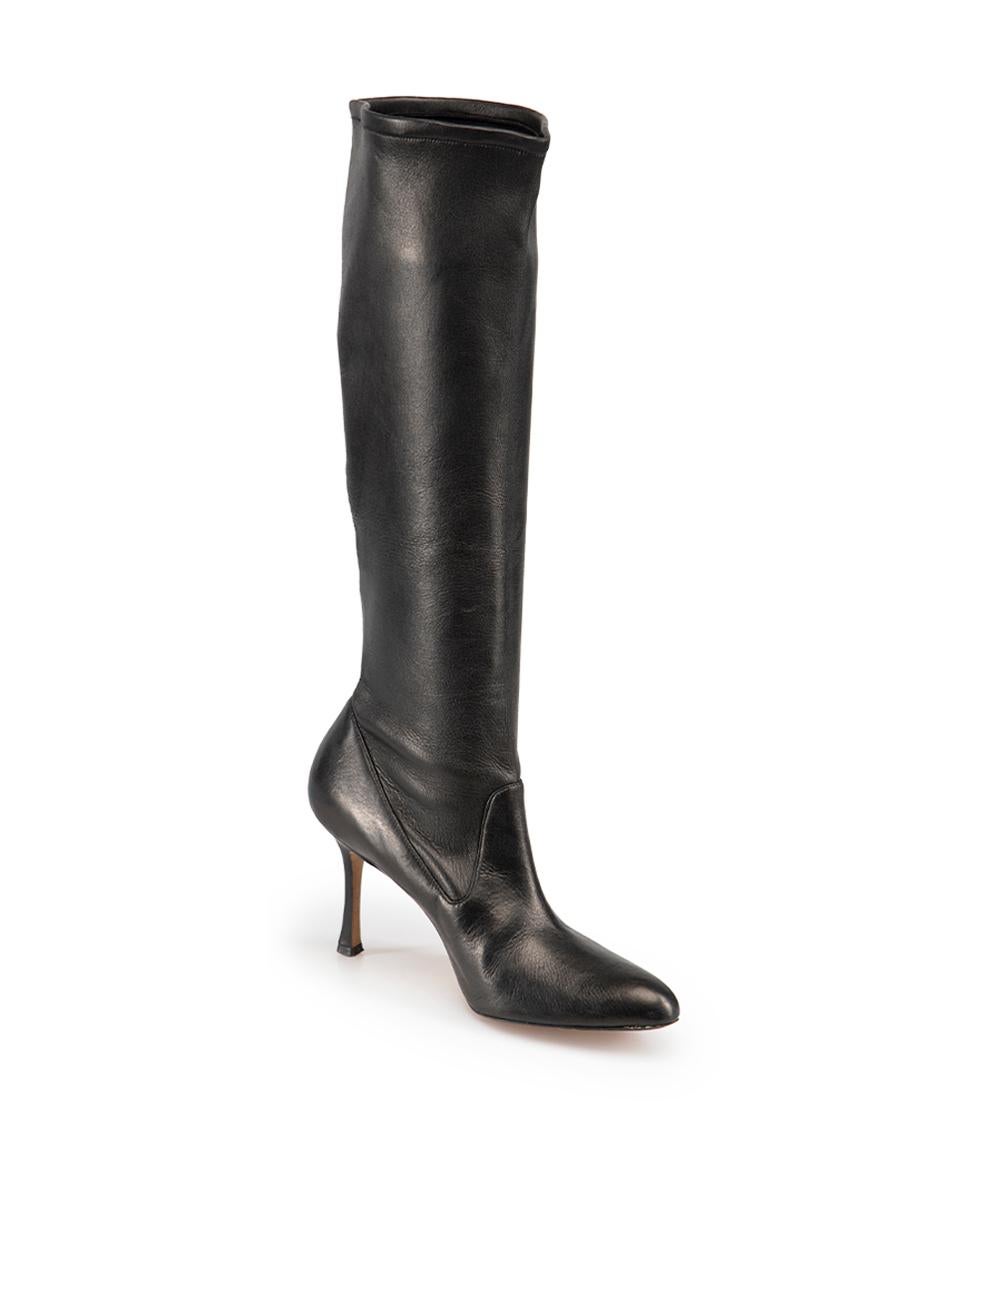 CONDITION is Very good. Minimal wear to boots is evident. Minimal wear to the heels of both boots with very light scratches to the leather on this used Manolo Blahnik designer resale item.

Details
Black
Leather
Knee high boots
Point toe
High